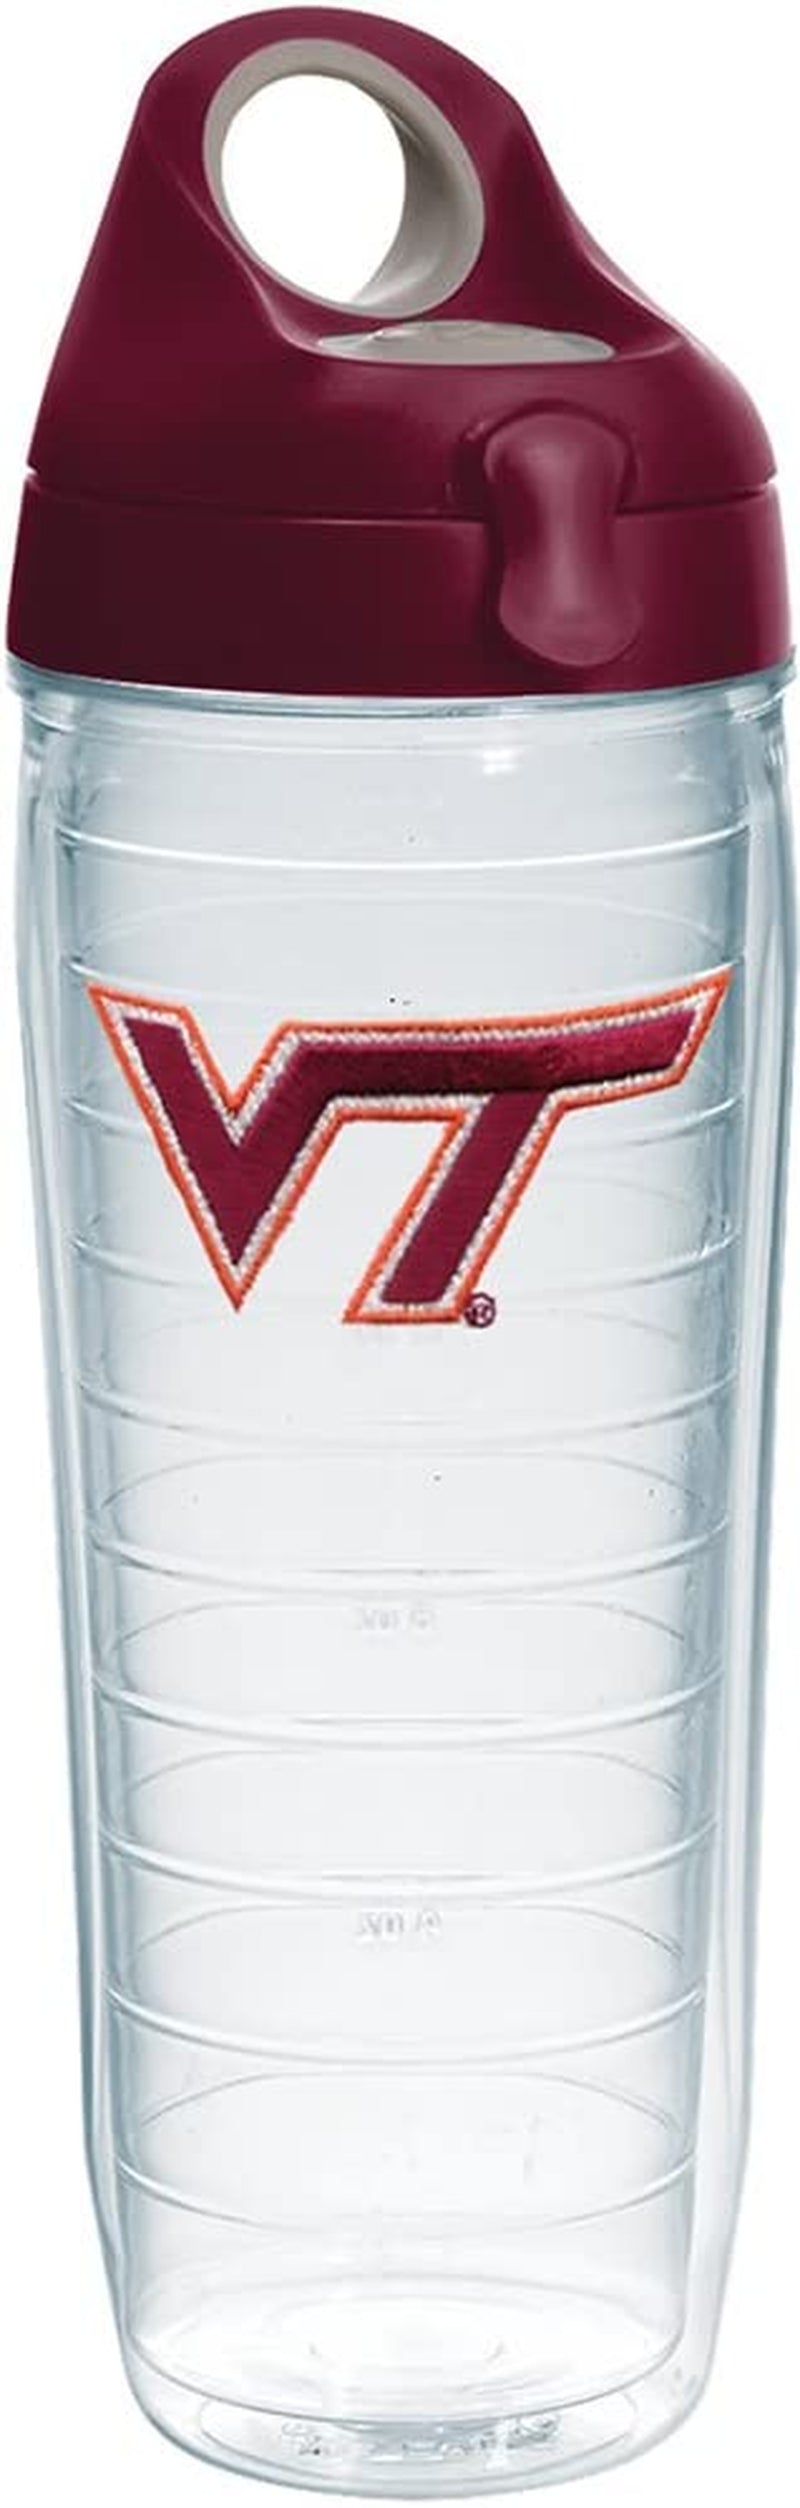 Tervis Virginia Tech University Hokies Made in USA Double Walled Insulated Tumbler, 1 Count (Pack of 1), Maroon Home & Garden > Kitchen & Dining > Tableware > Drinkware Tervis Primary Logo 24 oz Water Bottle 